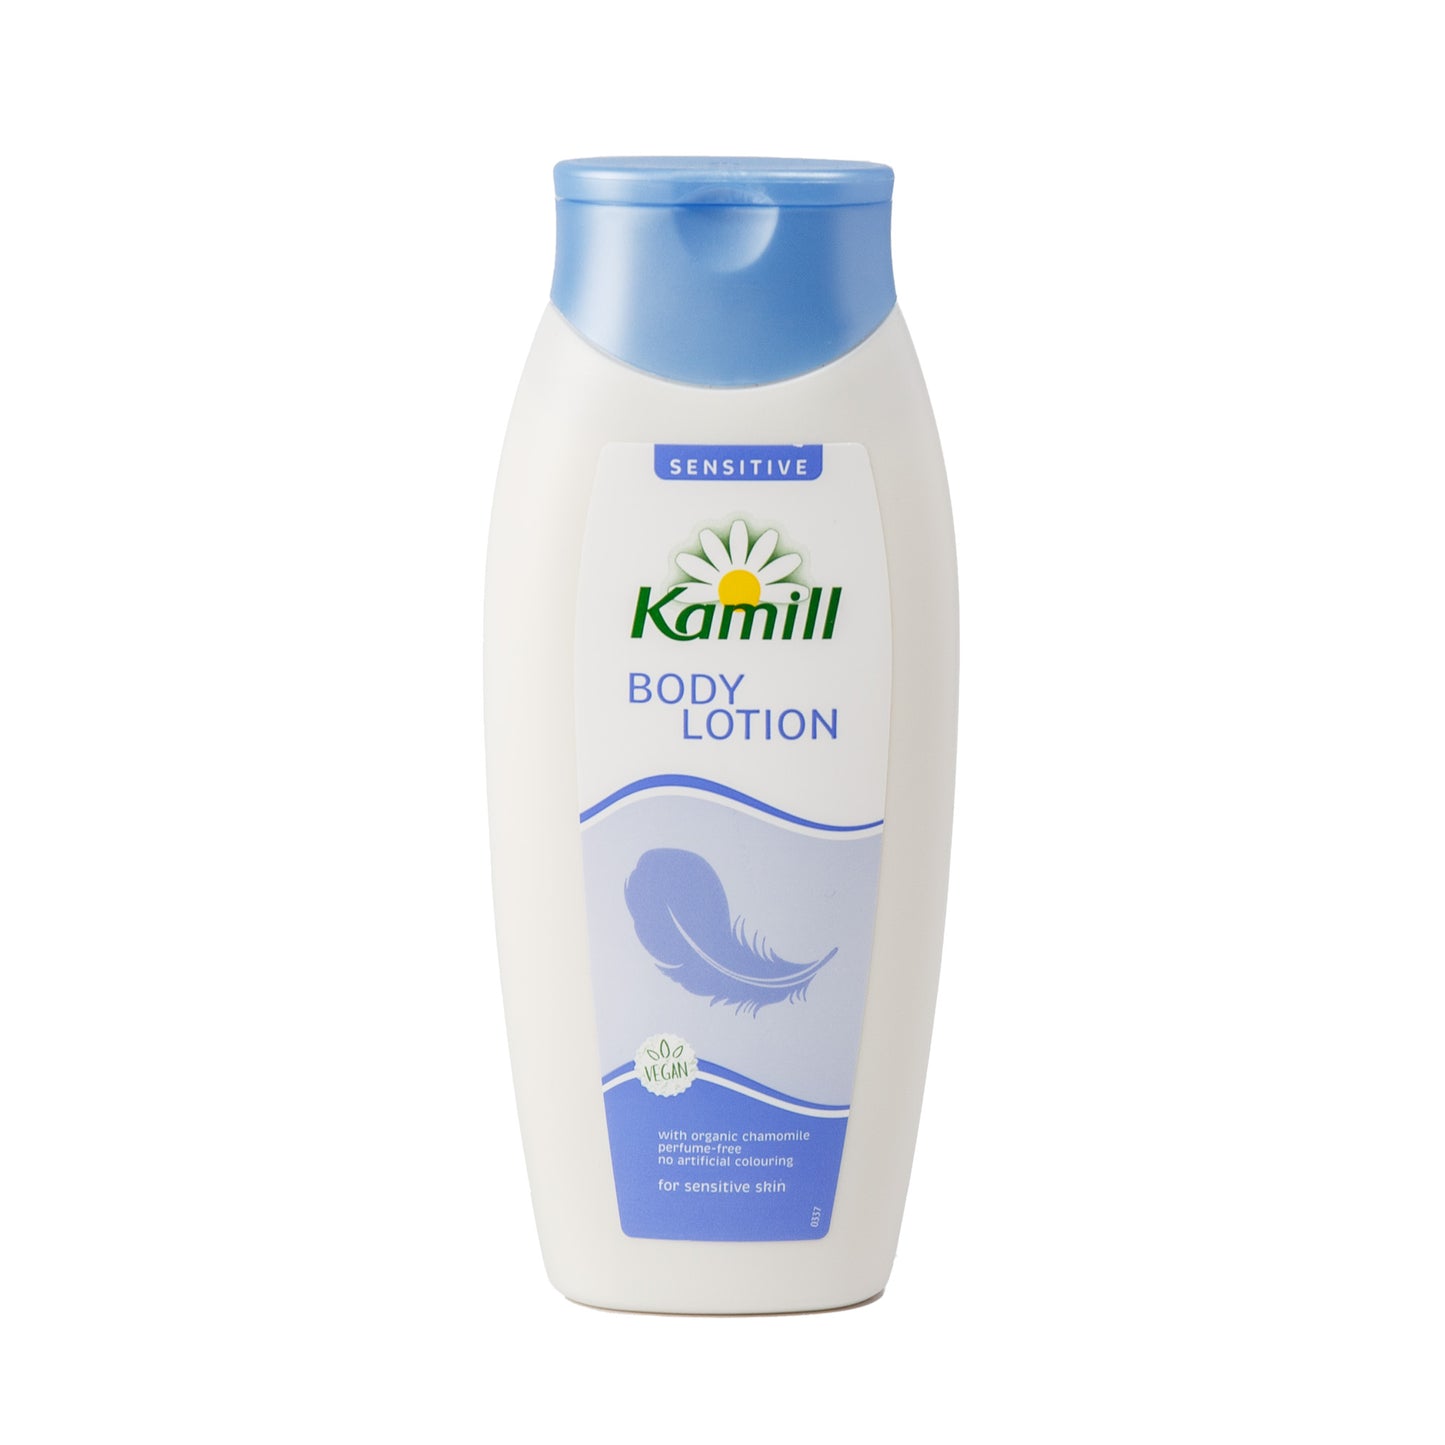 Primary image of Kamill Sensitive Body Lotion